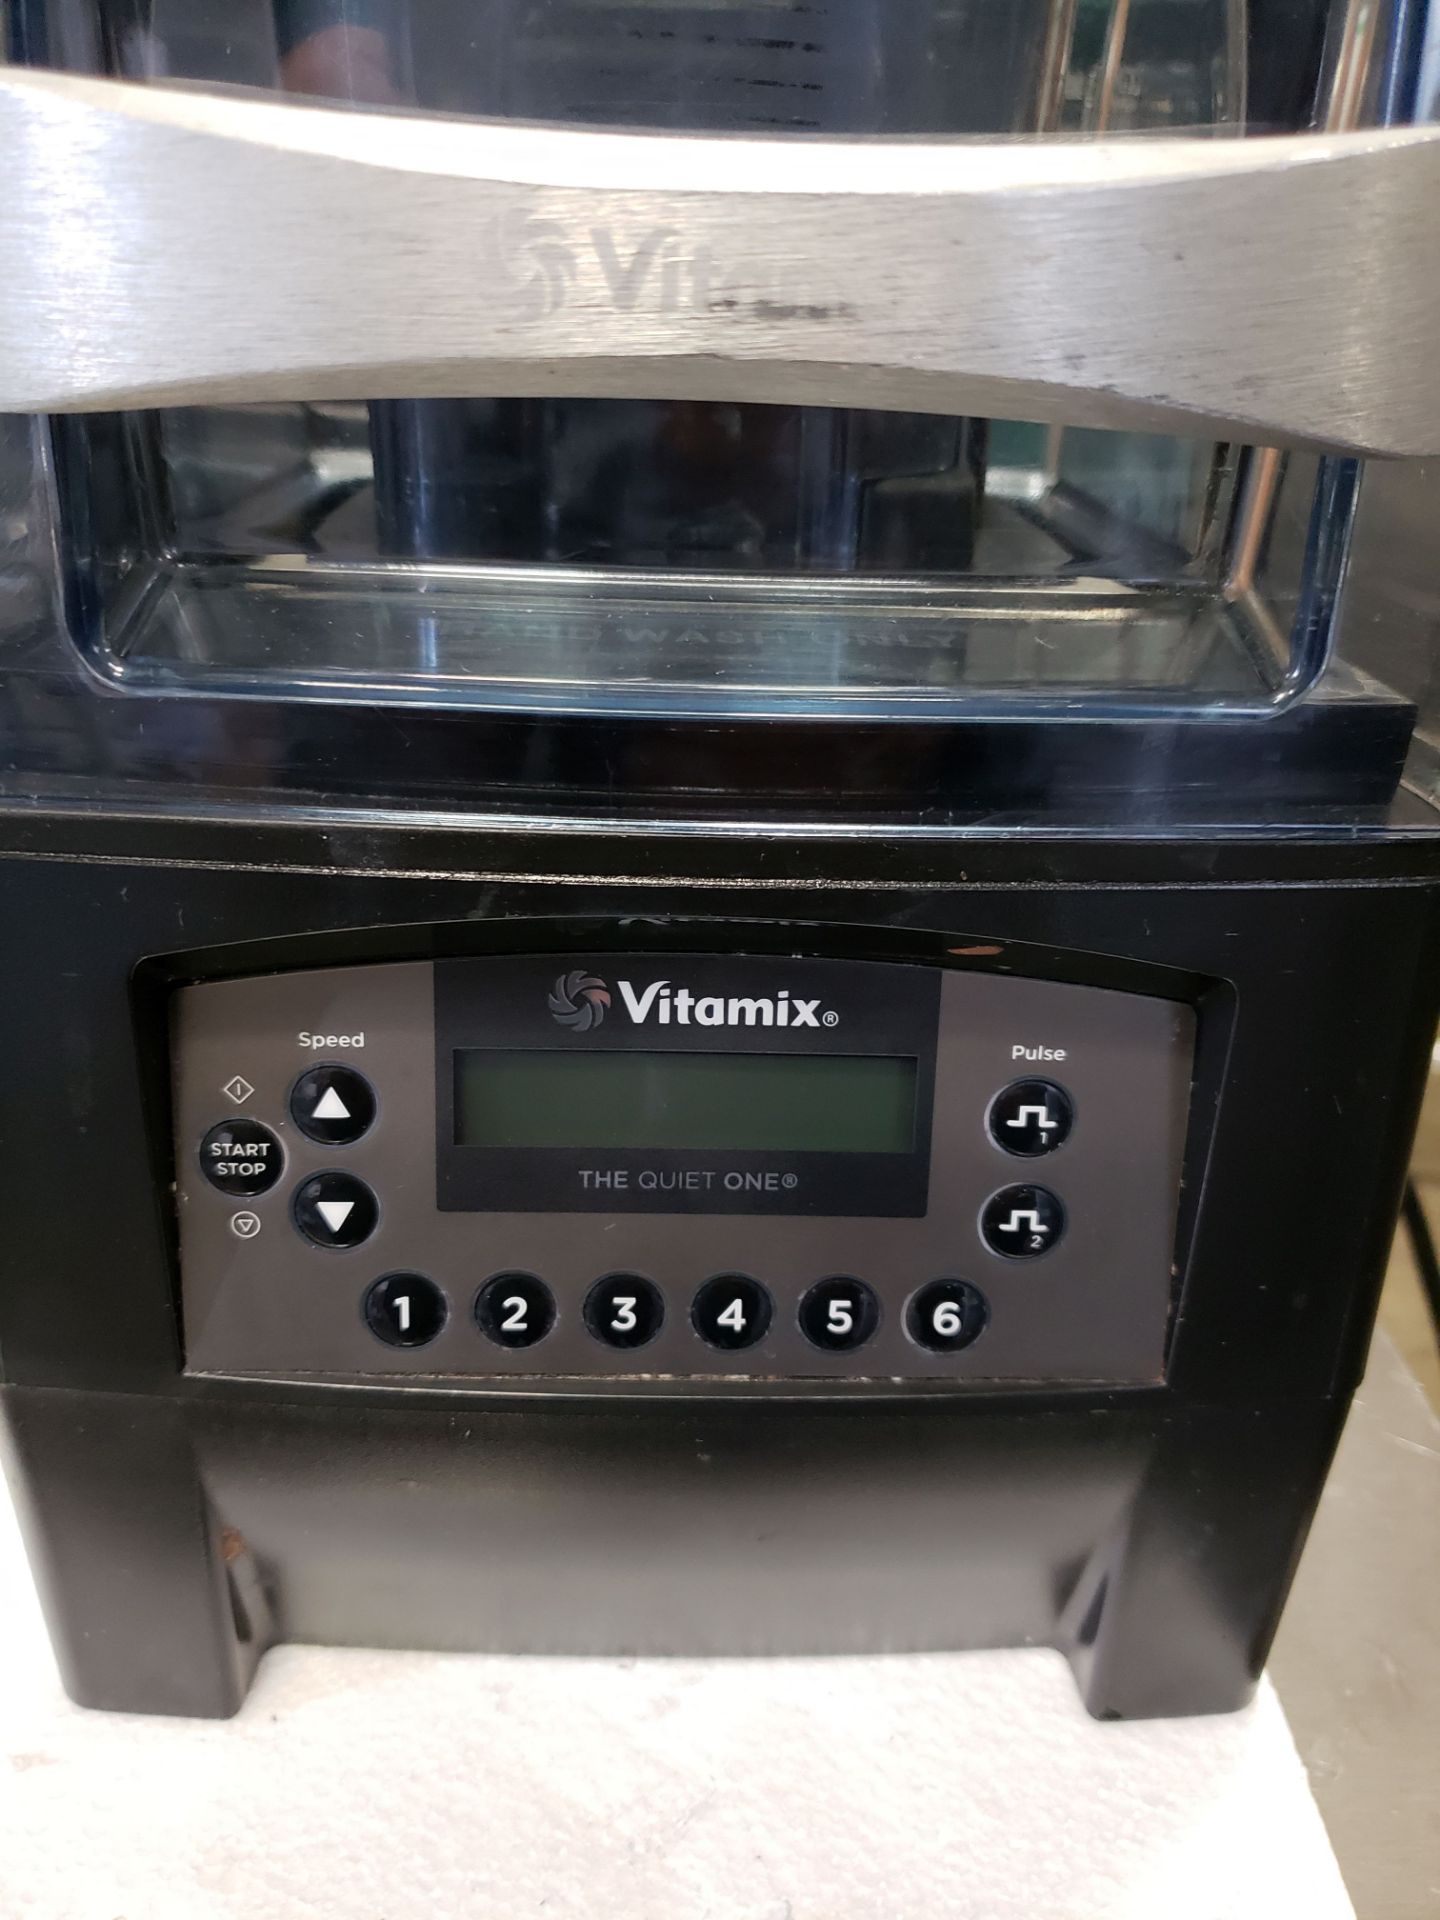 Vita Mix Commercial Food Prep Machine with Silencer - Model VM0145 - Image 2 of 4